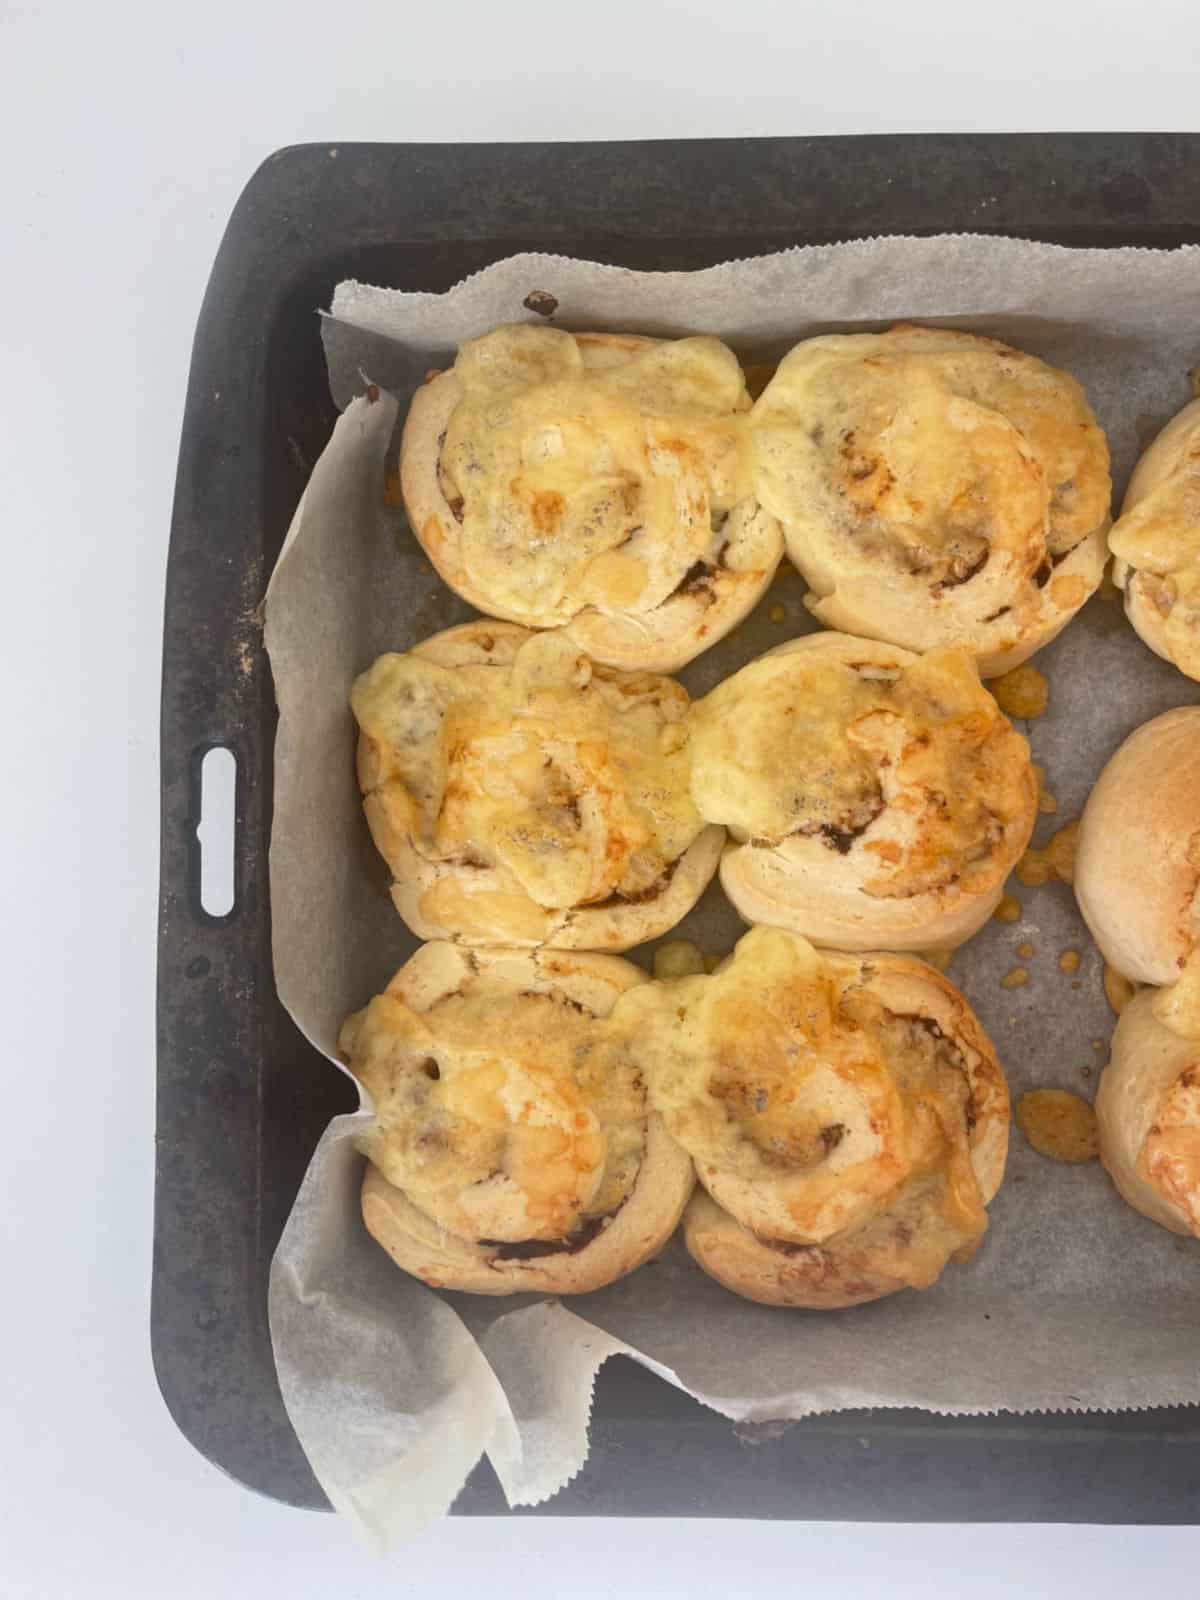 Vegemite and cheese scrolls in a baking tray straight after coming out of the oven.